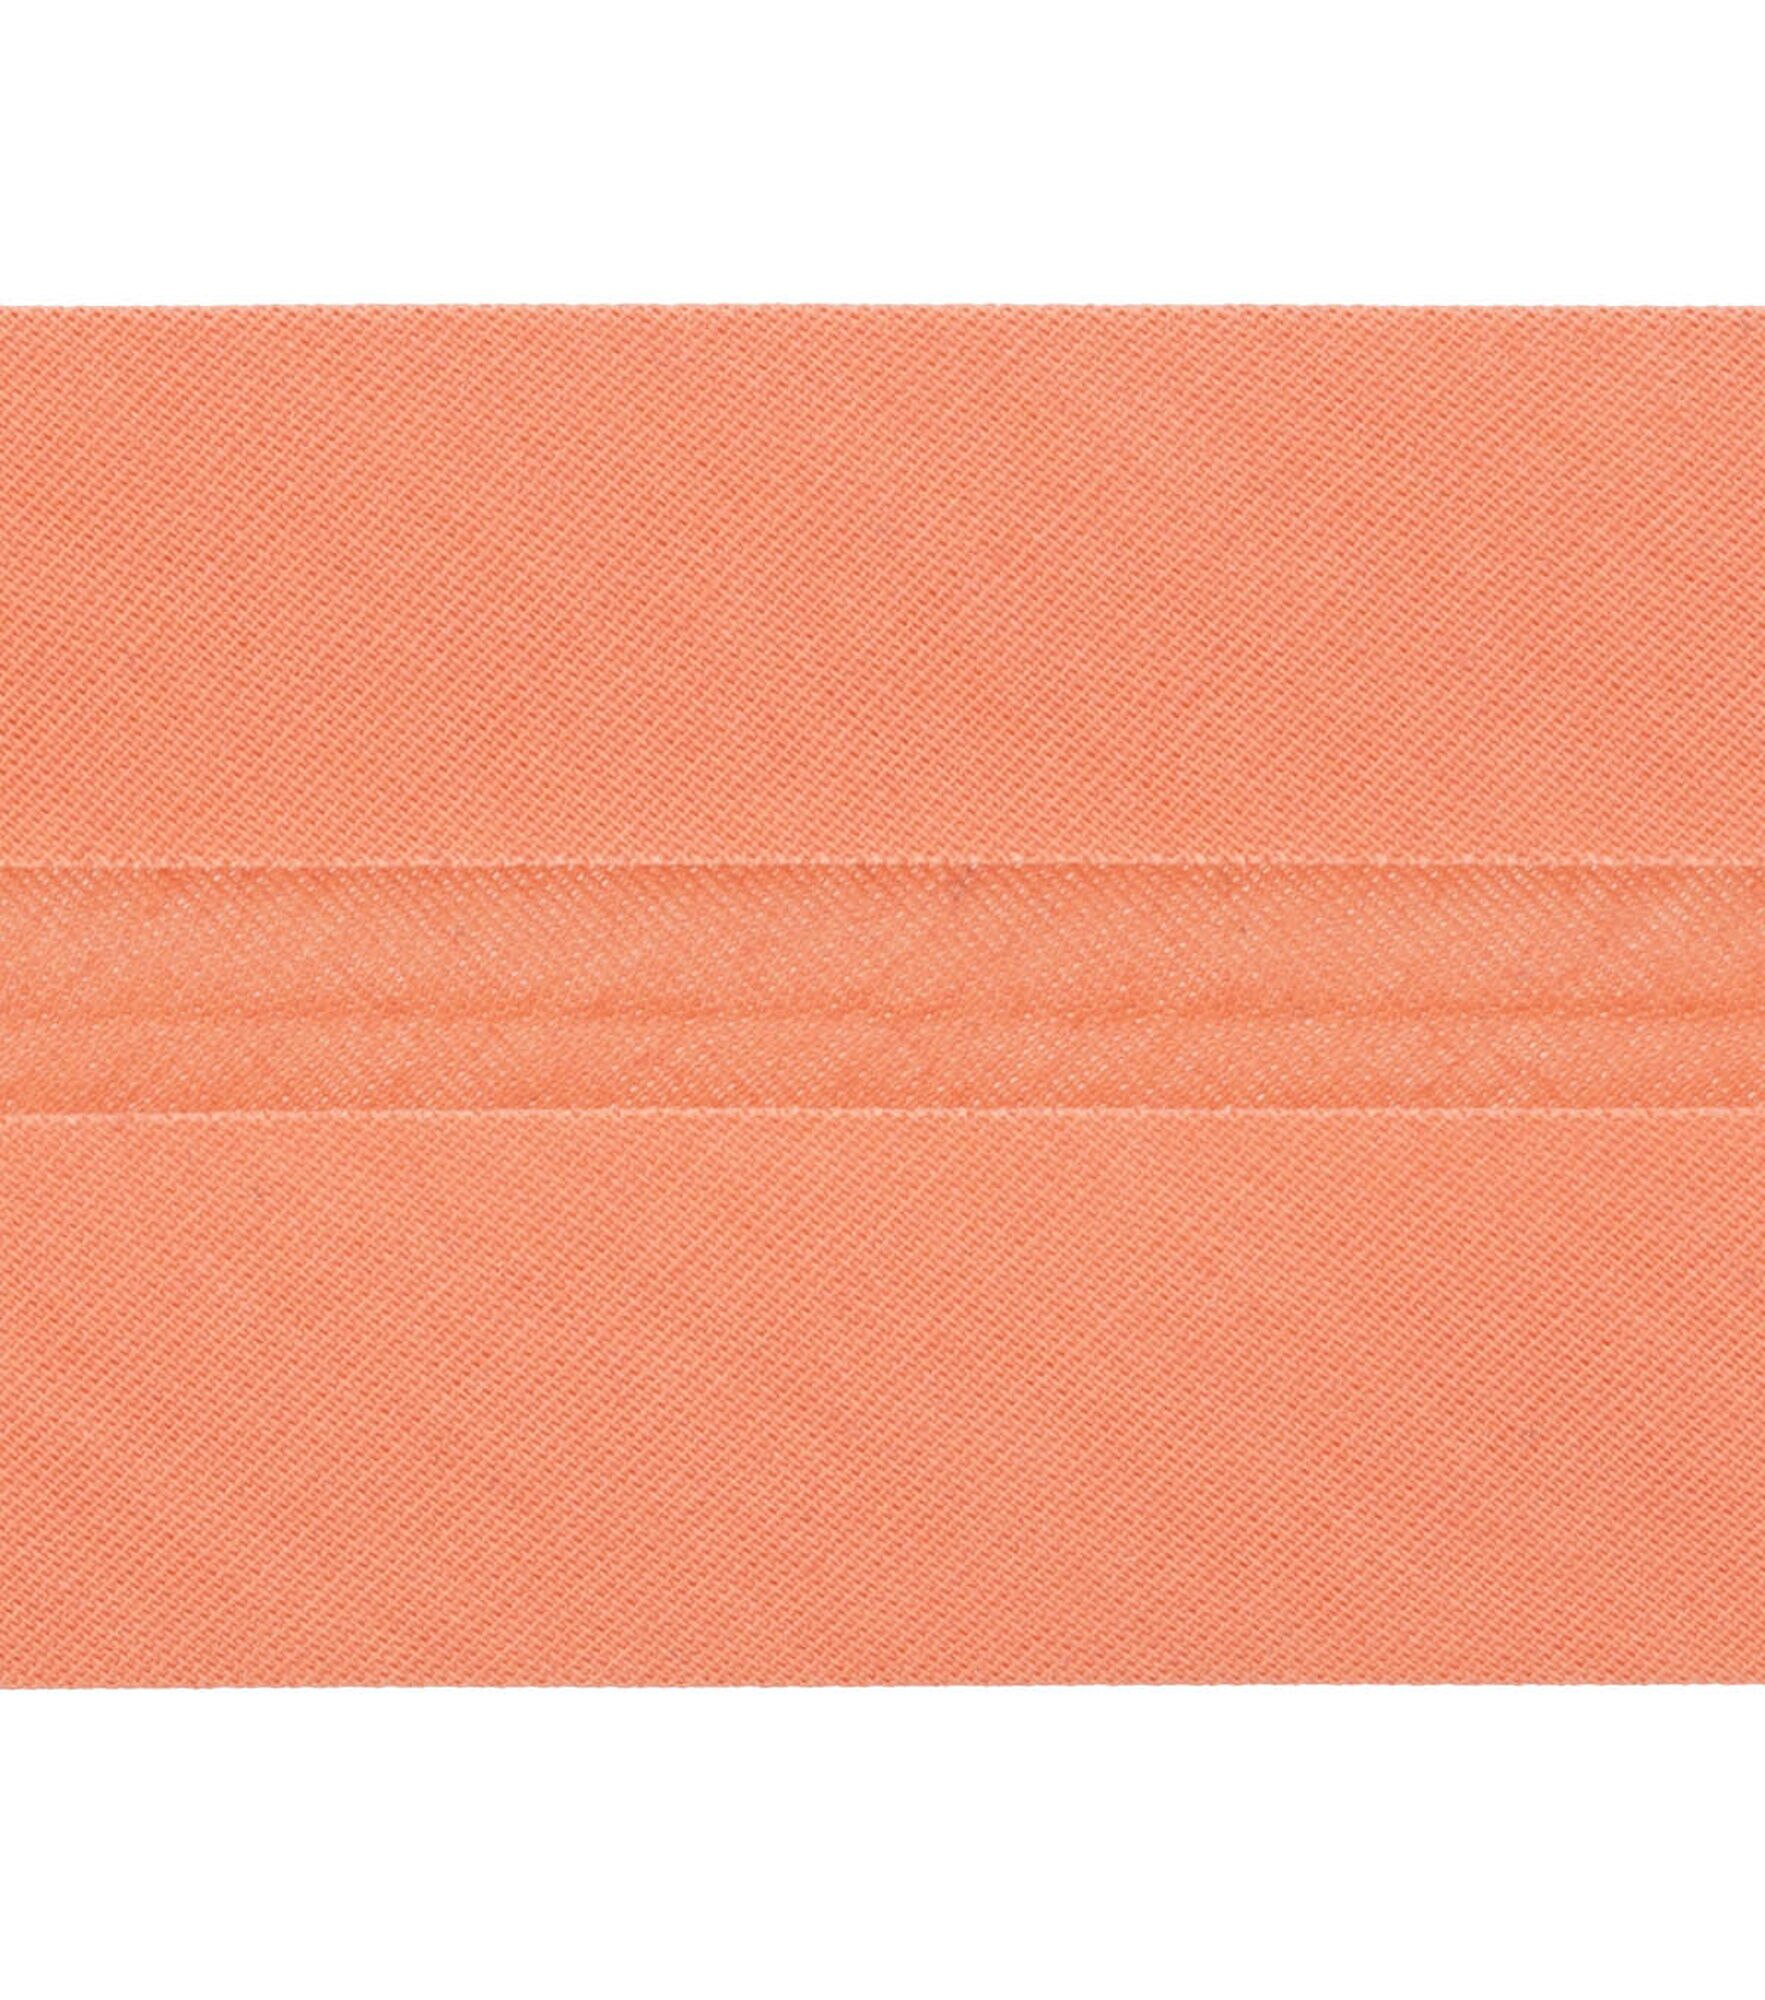 Wrights 7/8" x 3yd Double Fold Quilt Binding, Coral Sea, hi-res